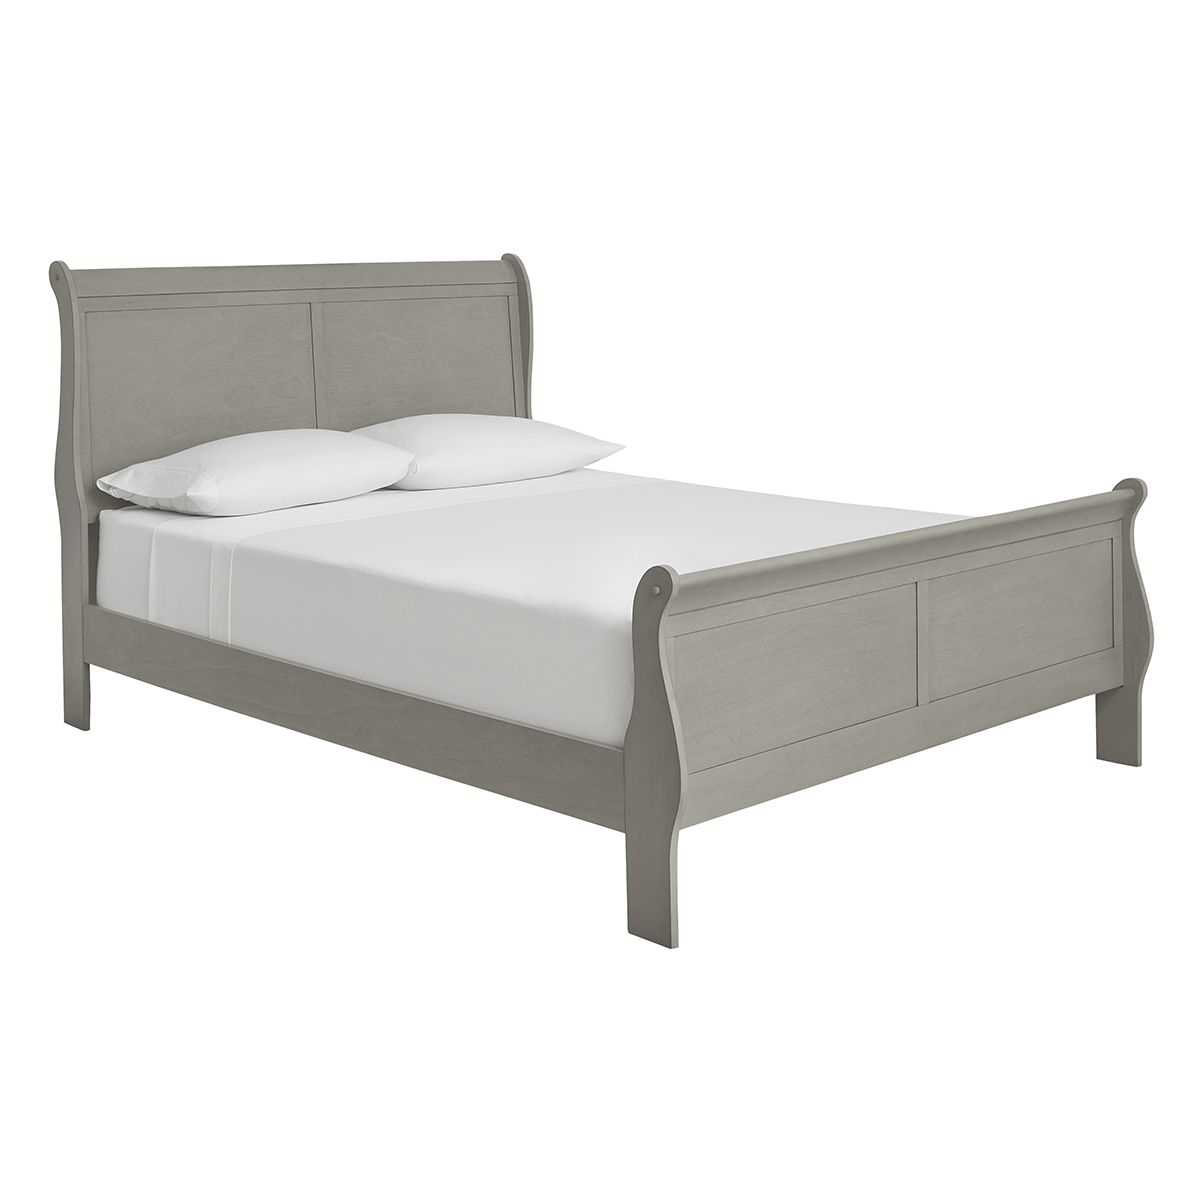 Picture of LOUIS SLEIGH GREY KING BED